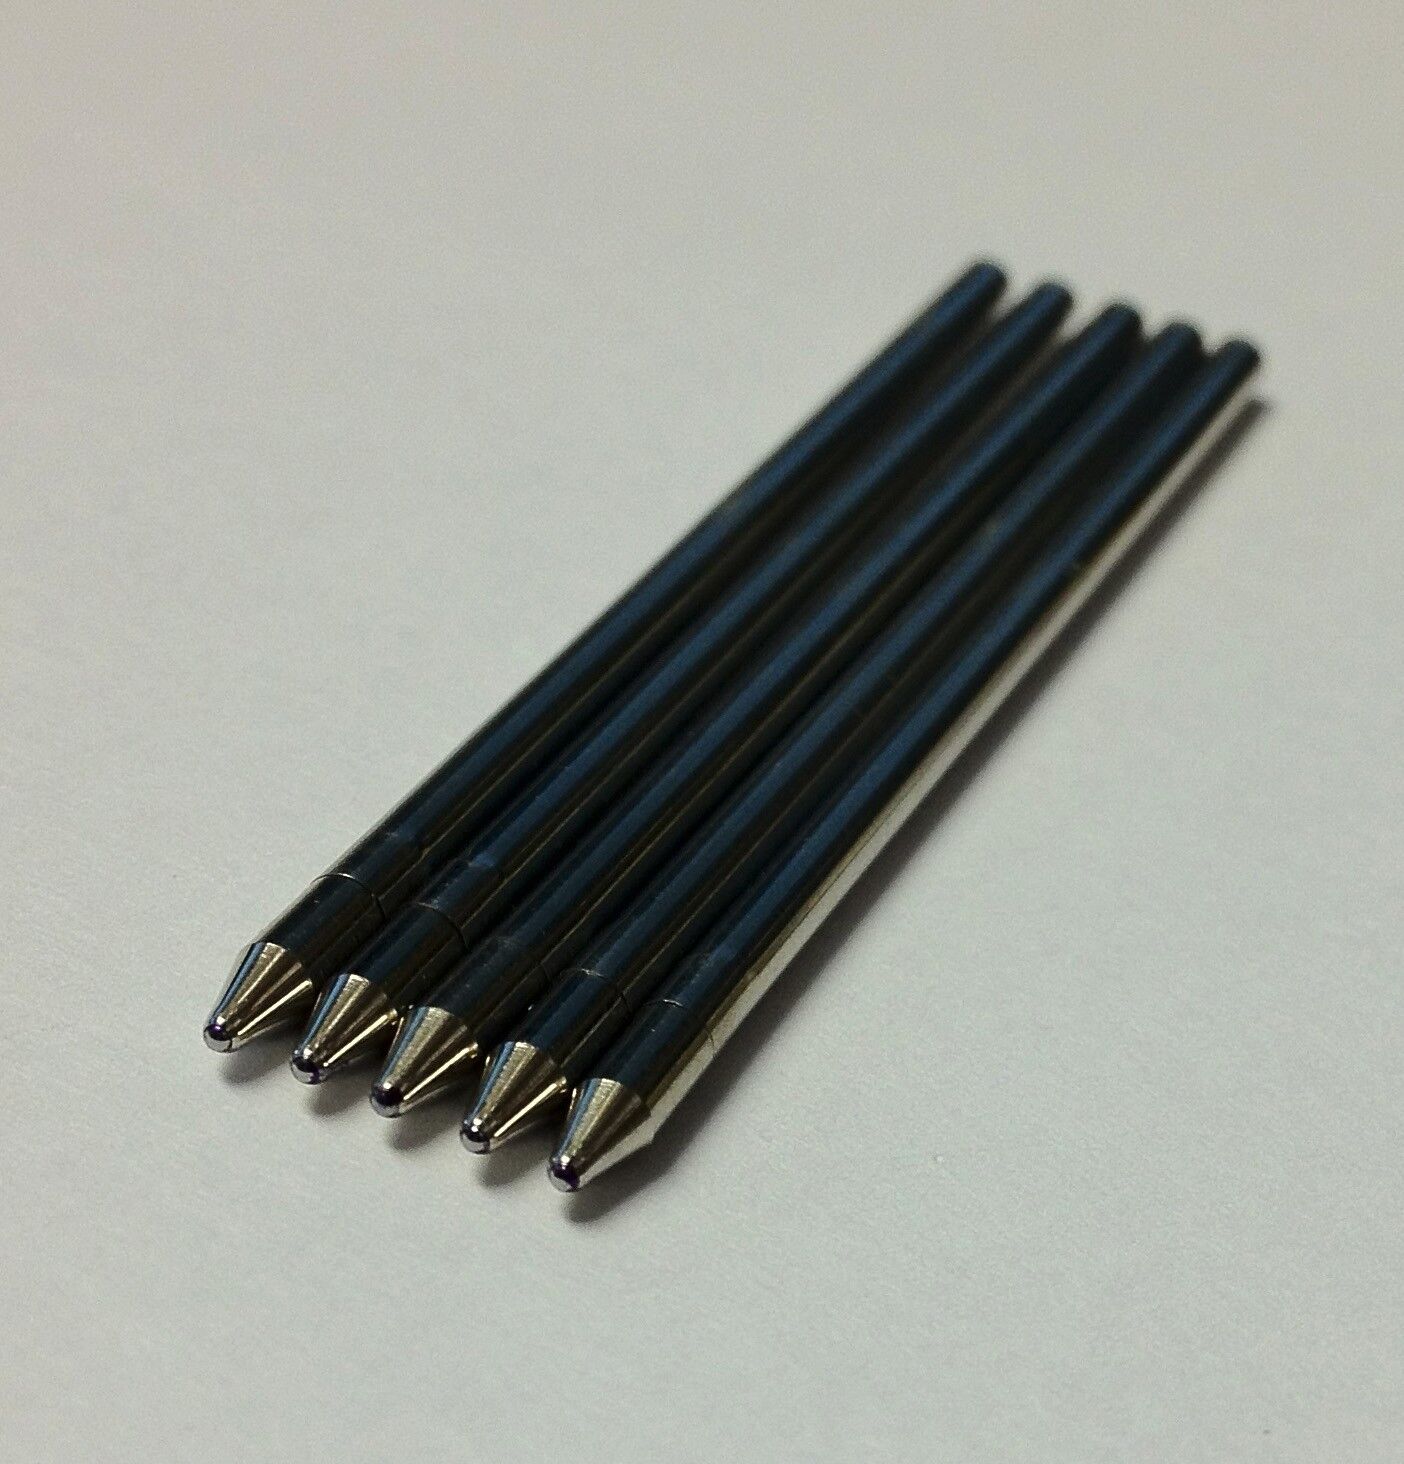 Blue Fine tip Generic Refills. Smooth German ink for Livescribe Echo or Sky pens